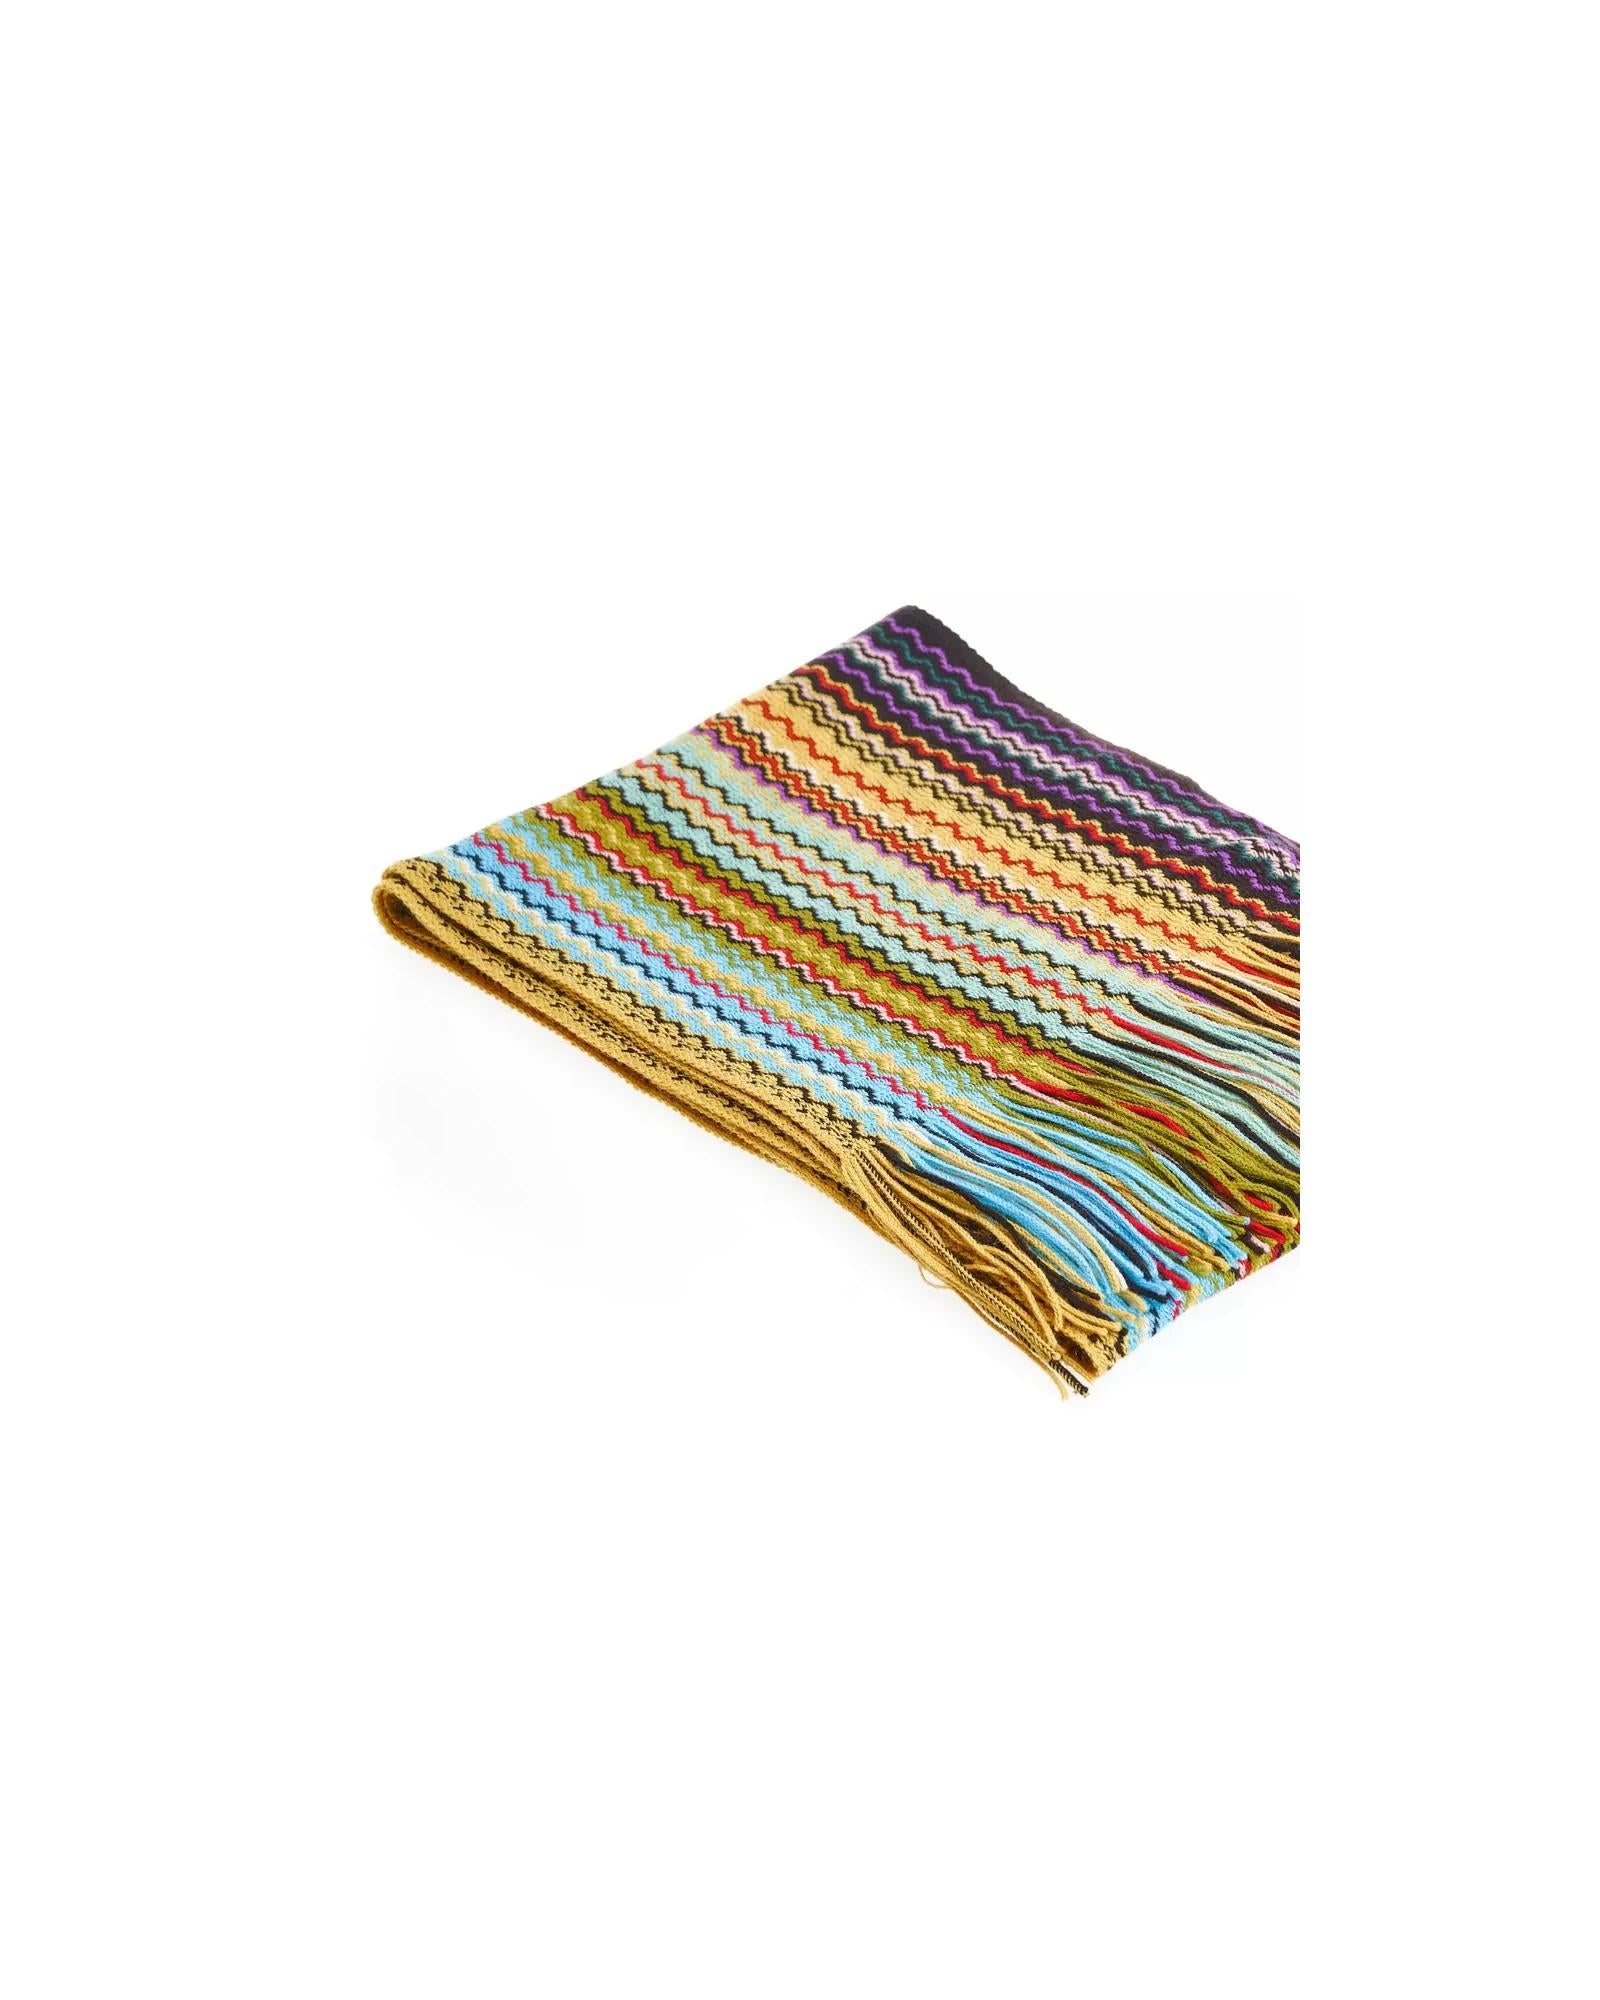 Geometric Fringed Scarf with Vibrant Colors One Size Women